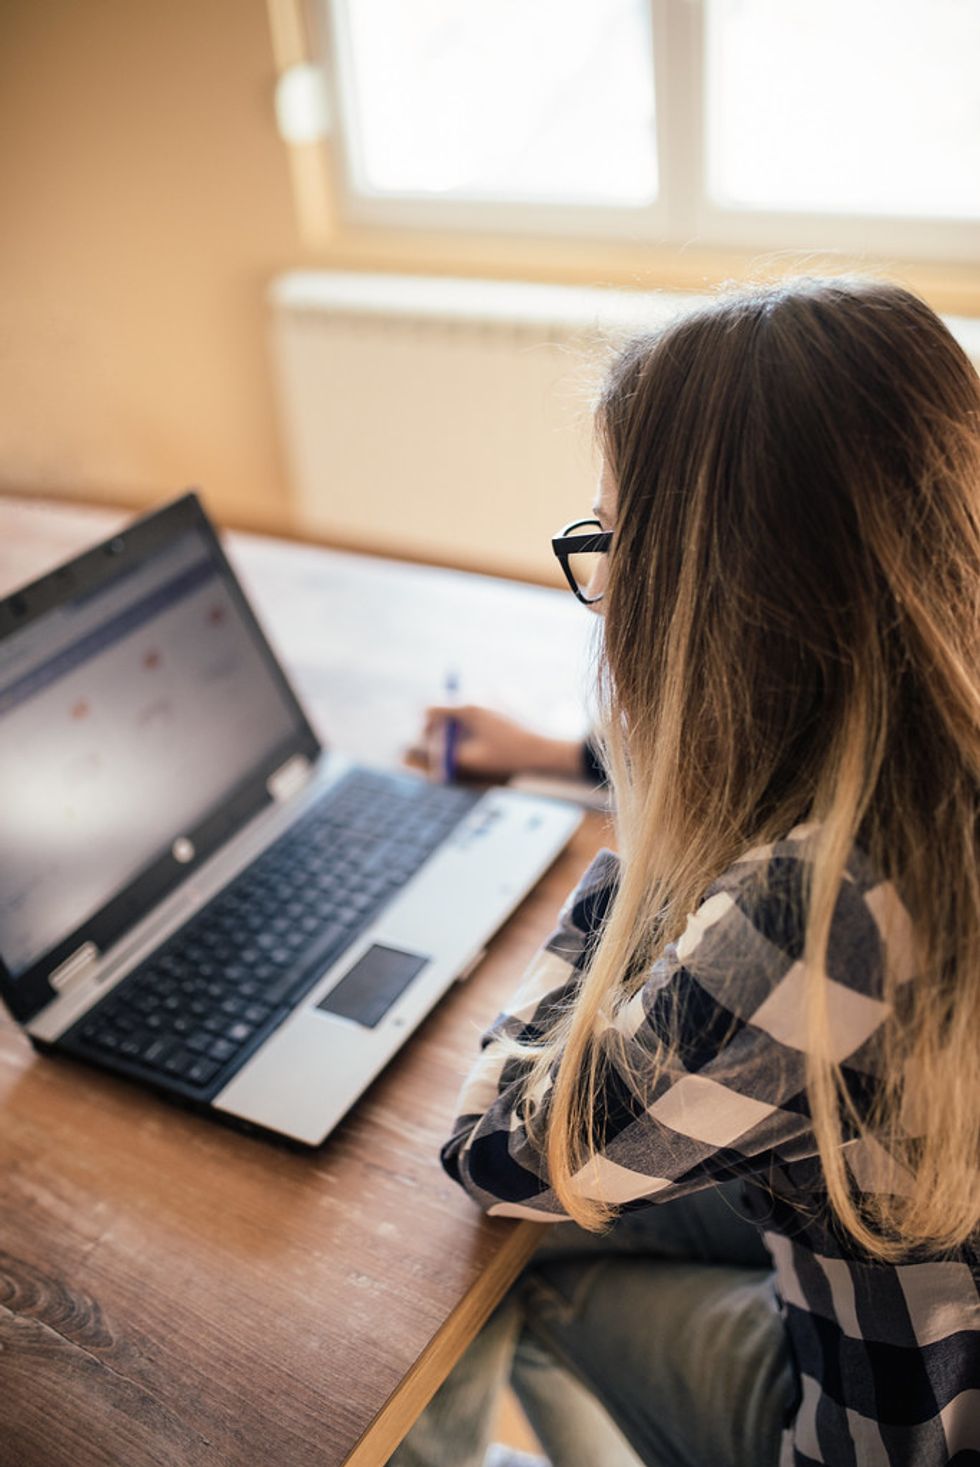 3 Ways I Help Myself Not Fall Behind On Online Classes